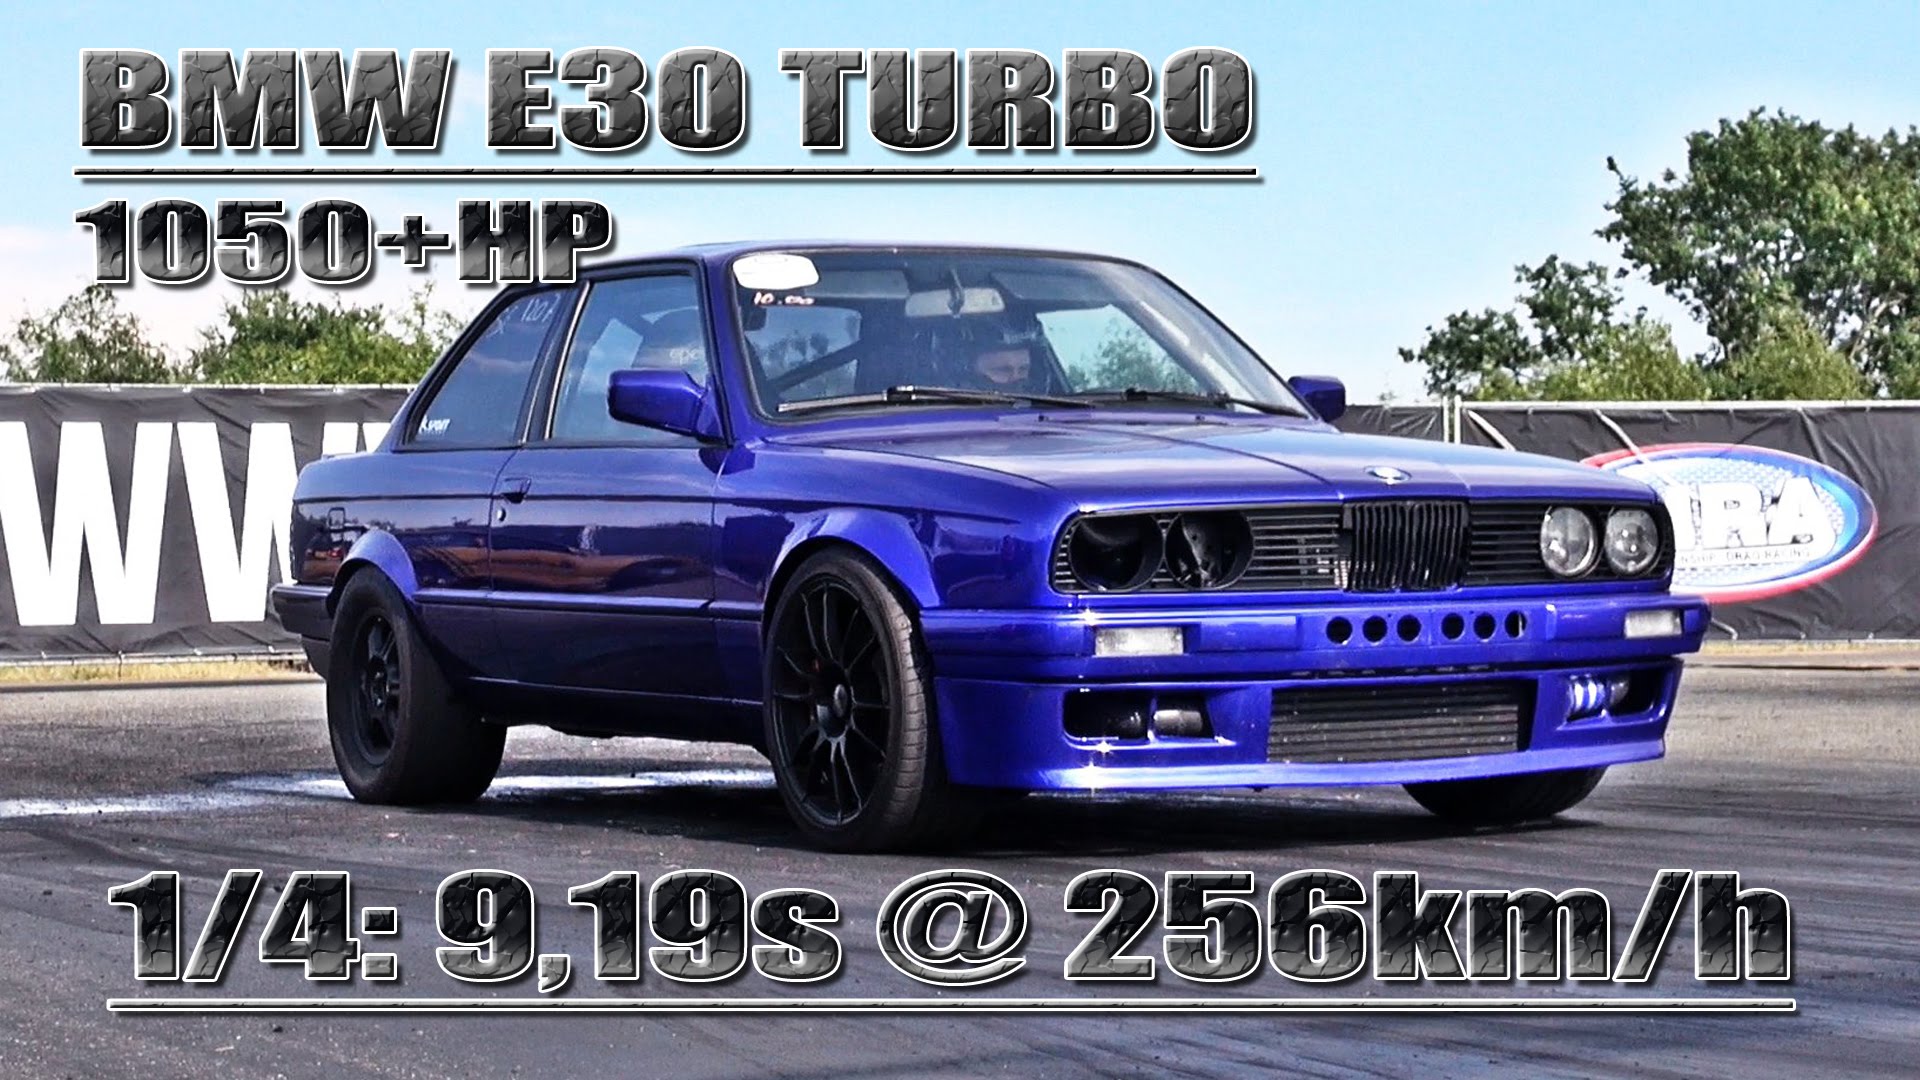 BMW E30 3 6L Turbo 1050HP 9 Second Car Turbo and Stance